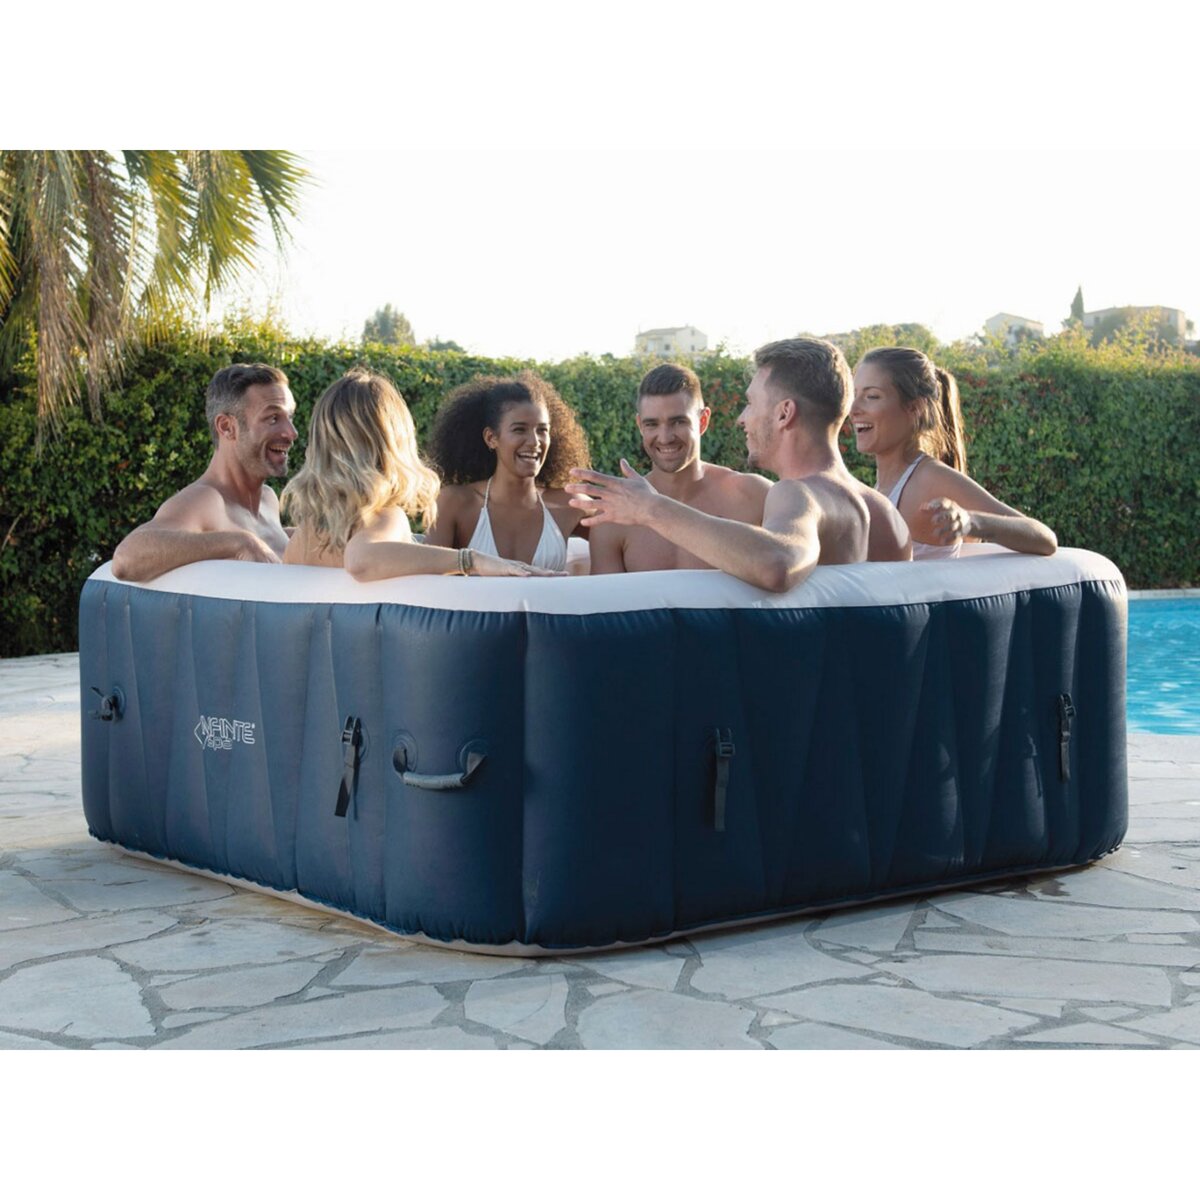 Spa gonflable xtra rond bulles 8 places - infinite spa INFINITE